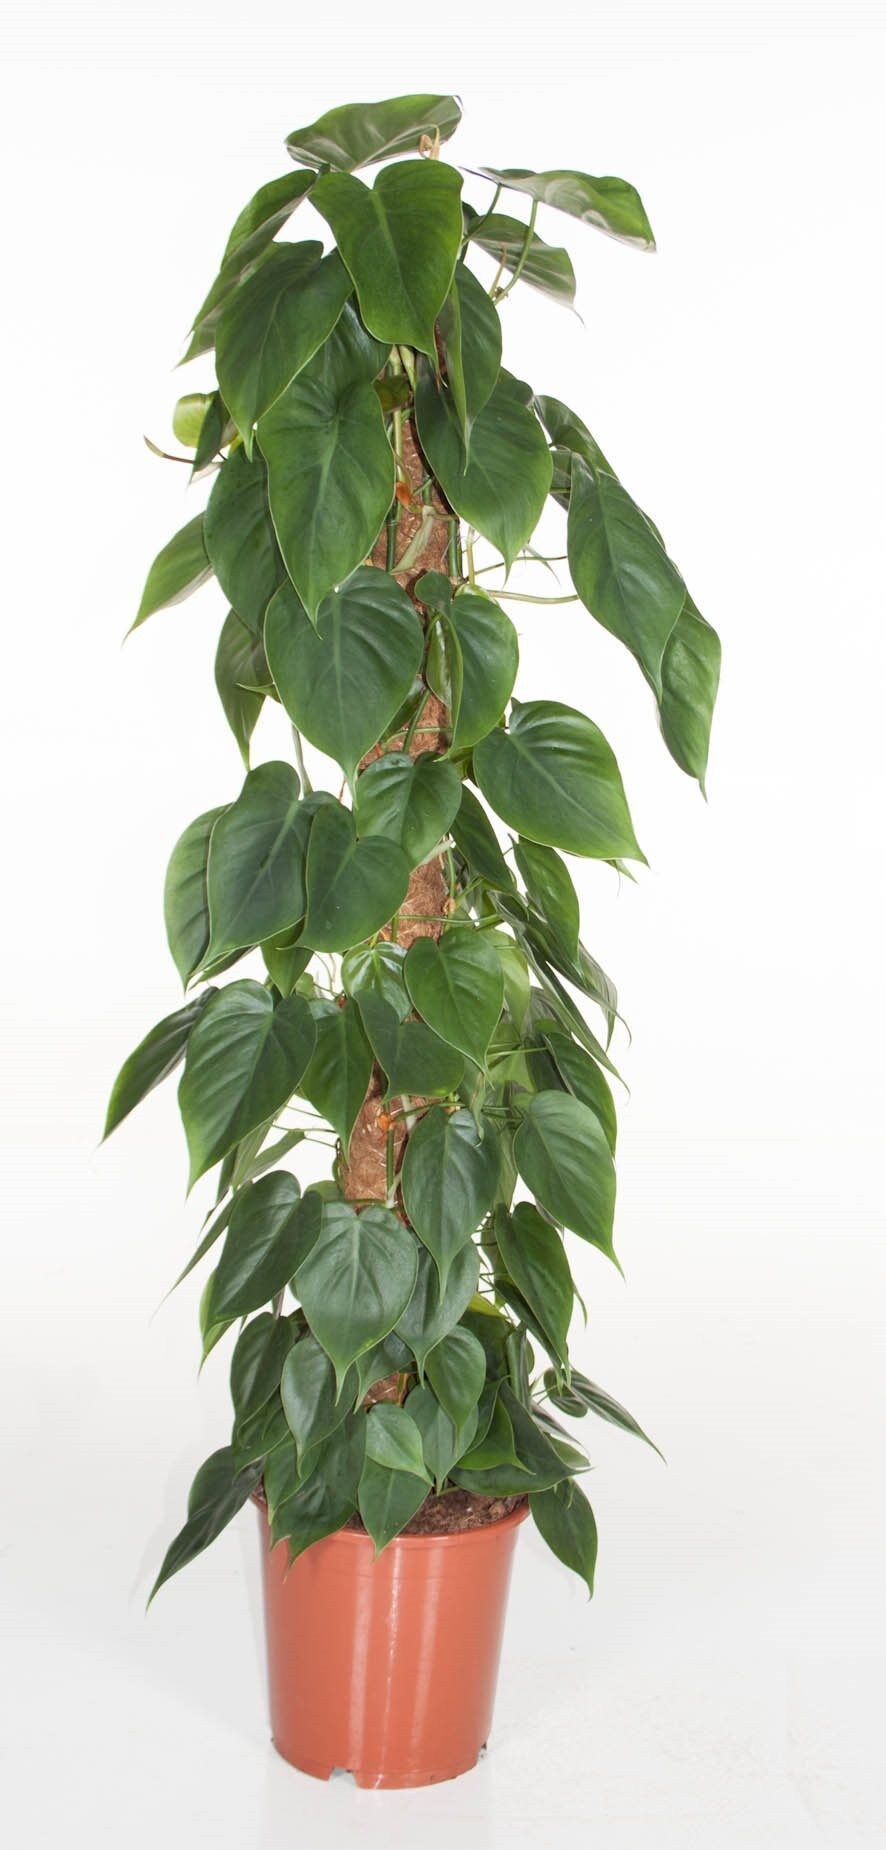 Philodendron op mosstok (Philodendron Scandens)